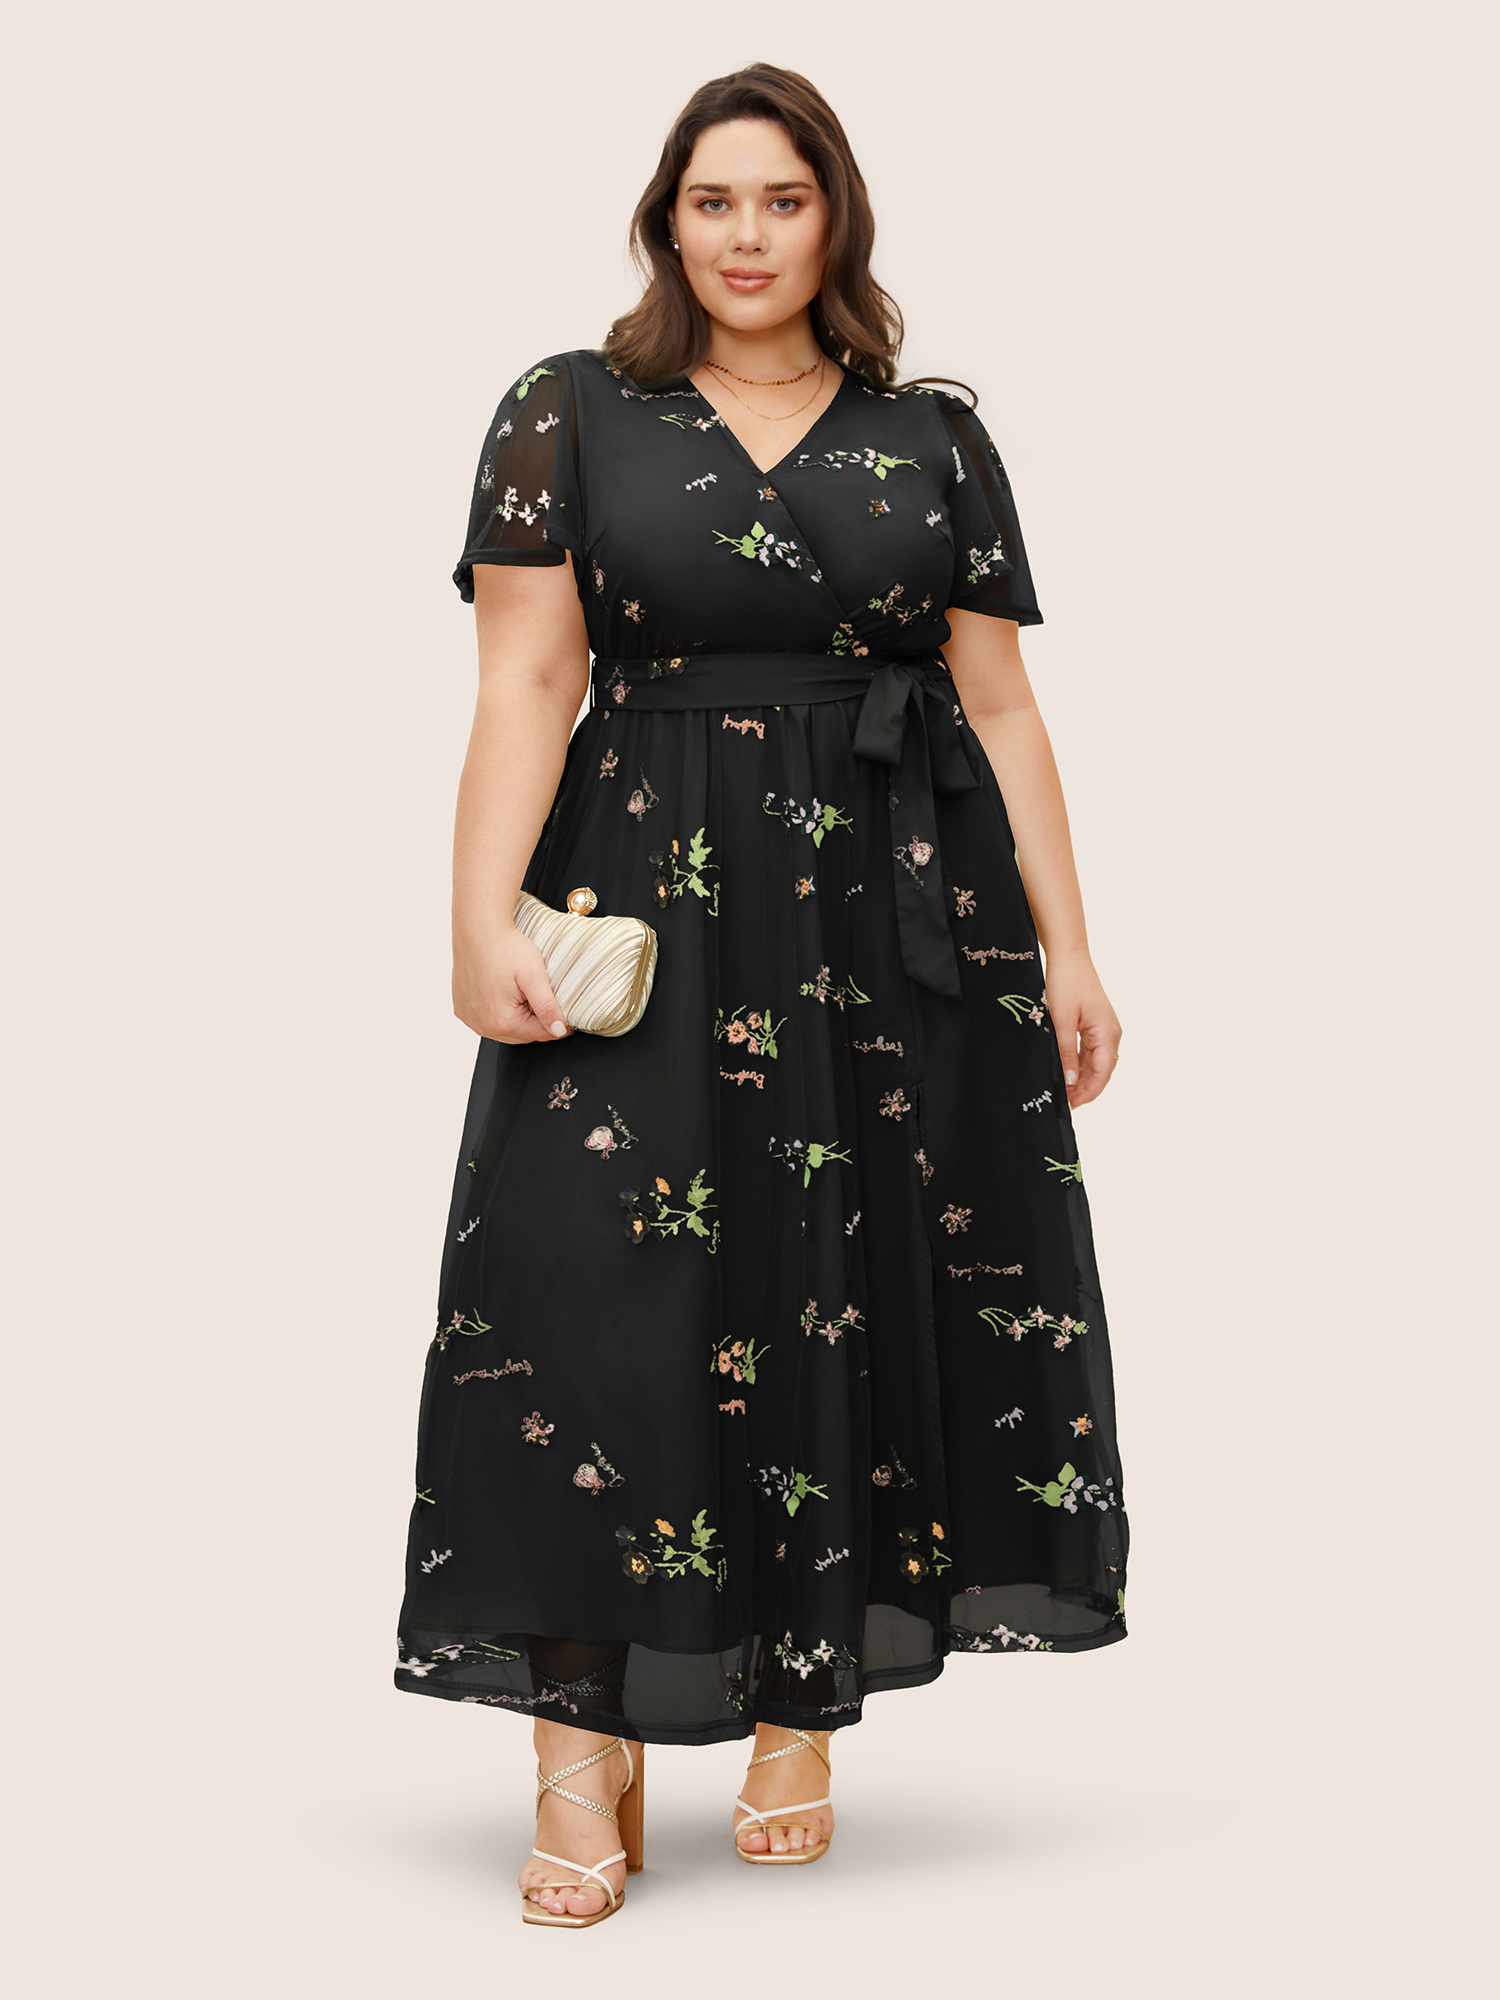 

Plus Size Overlap Collar Mesh Floral Embroidered Dress Black Women Formal Overlapping V-neck Short sleeve Curvy BloomChic